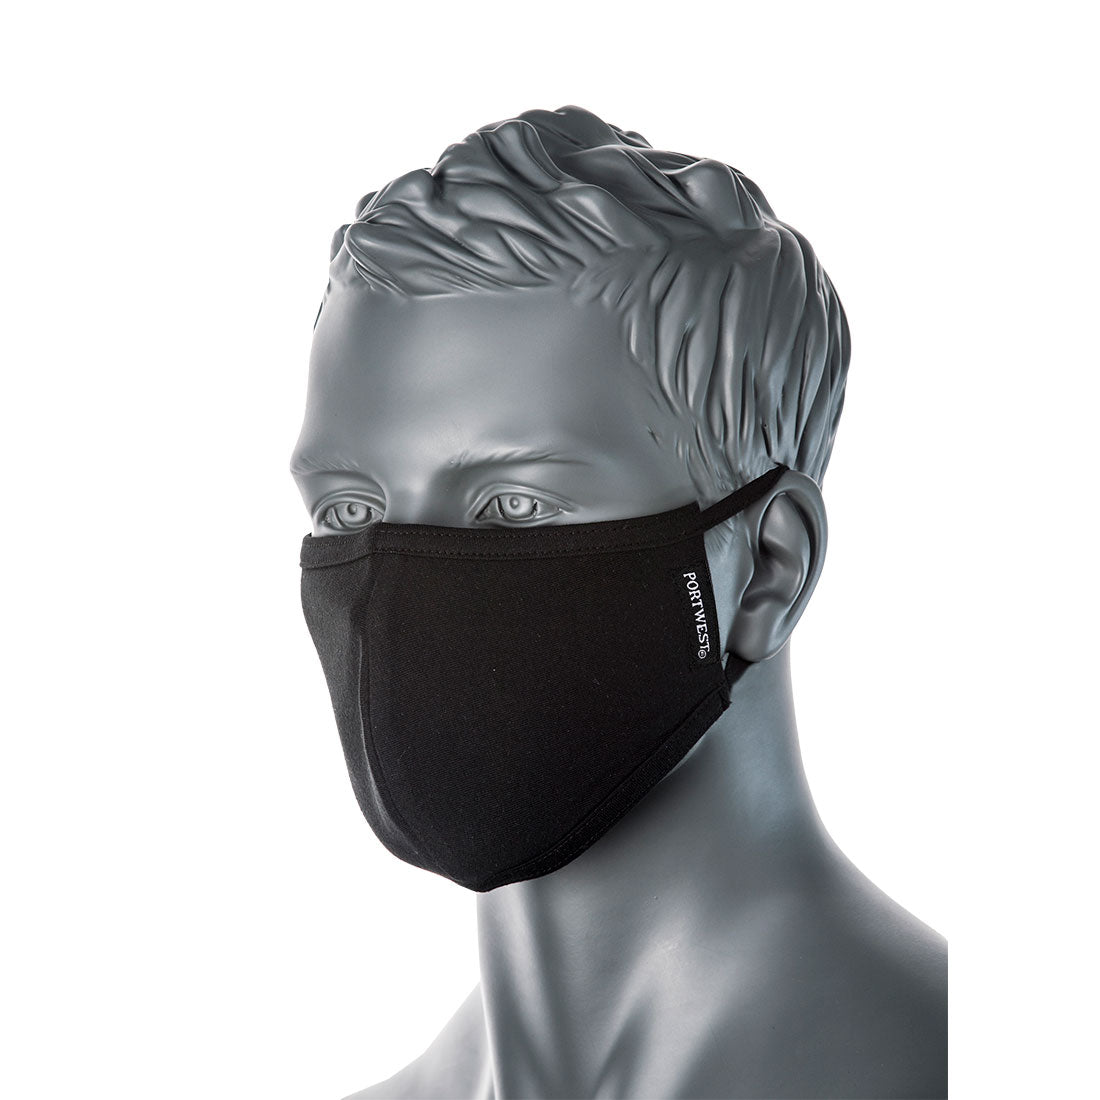 Portwest anti microbial 2 ply fabric Face mask - Black